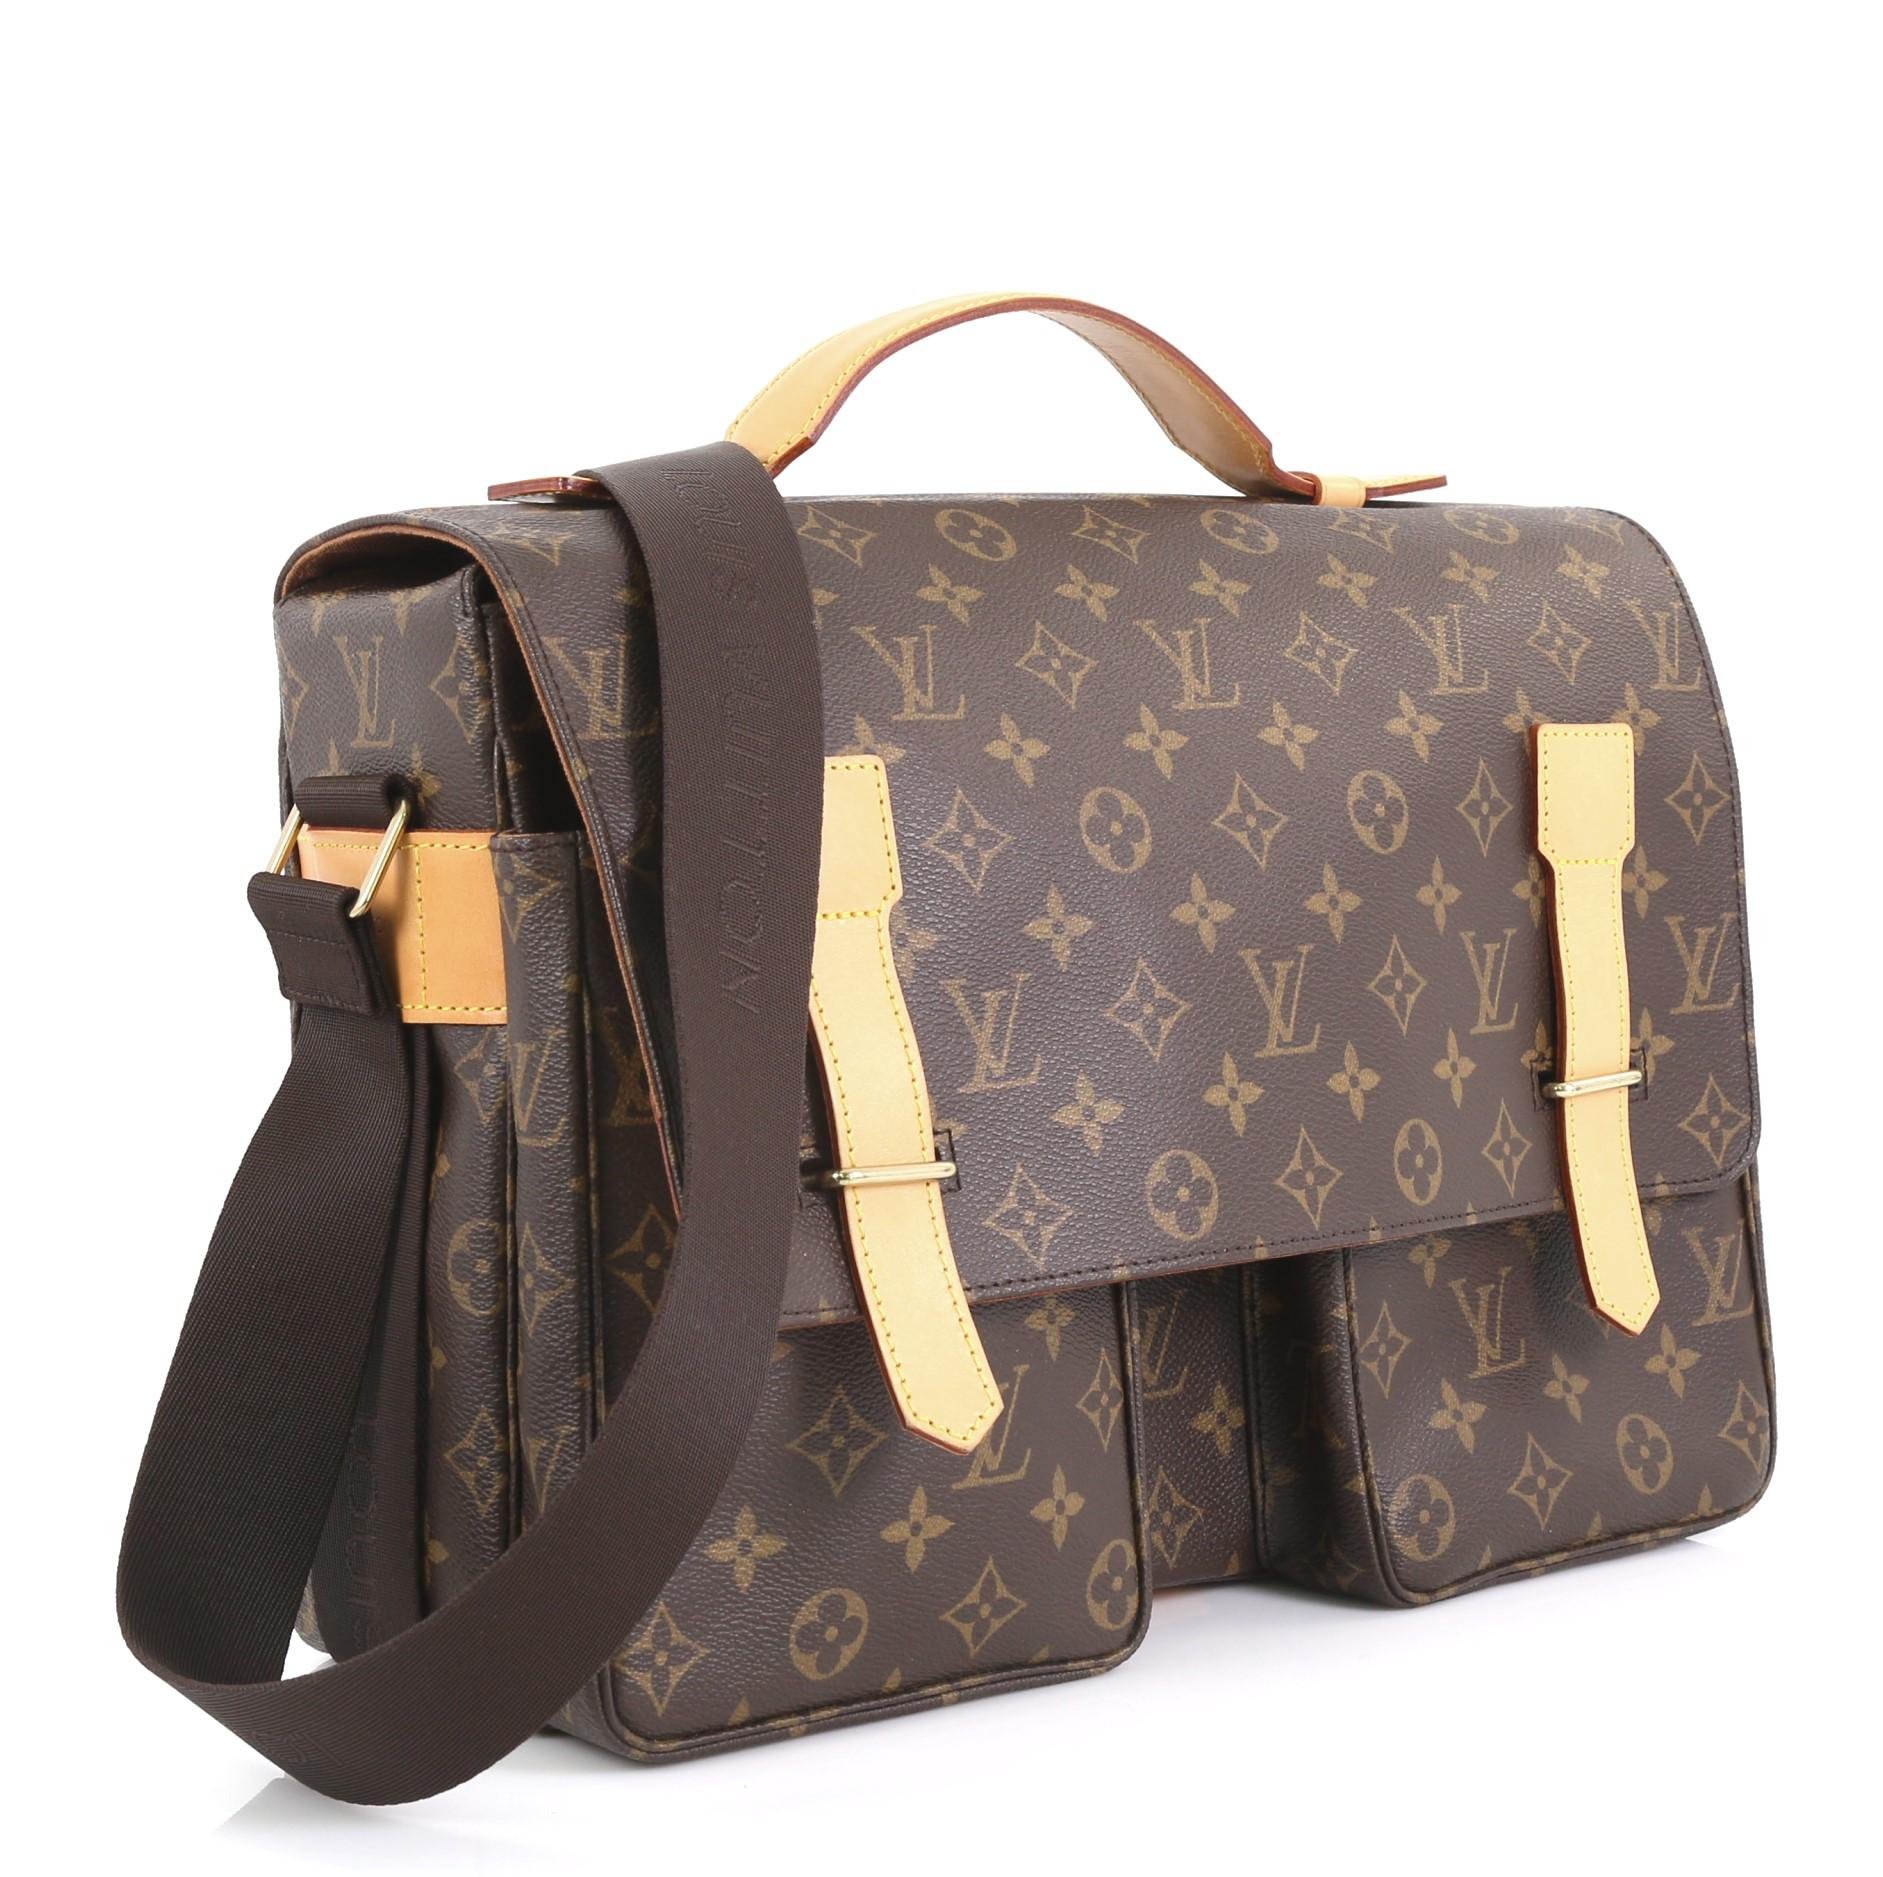 This Louis Vuitton Broadway Bag Monogram Canvas, crafted in brown monogram coated canvas, features an adjustable strap, top handle, two pockets under flap and gold-tone hardware. Its buckle closure opens to a brown canvas interior with slip pockets.